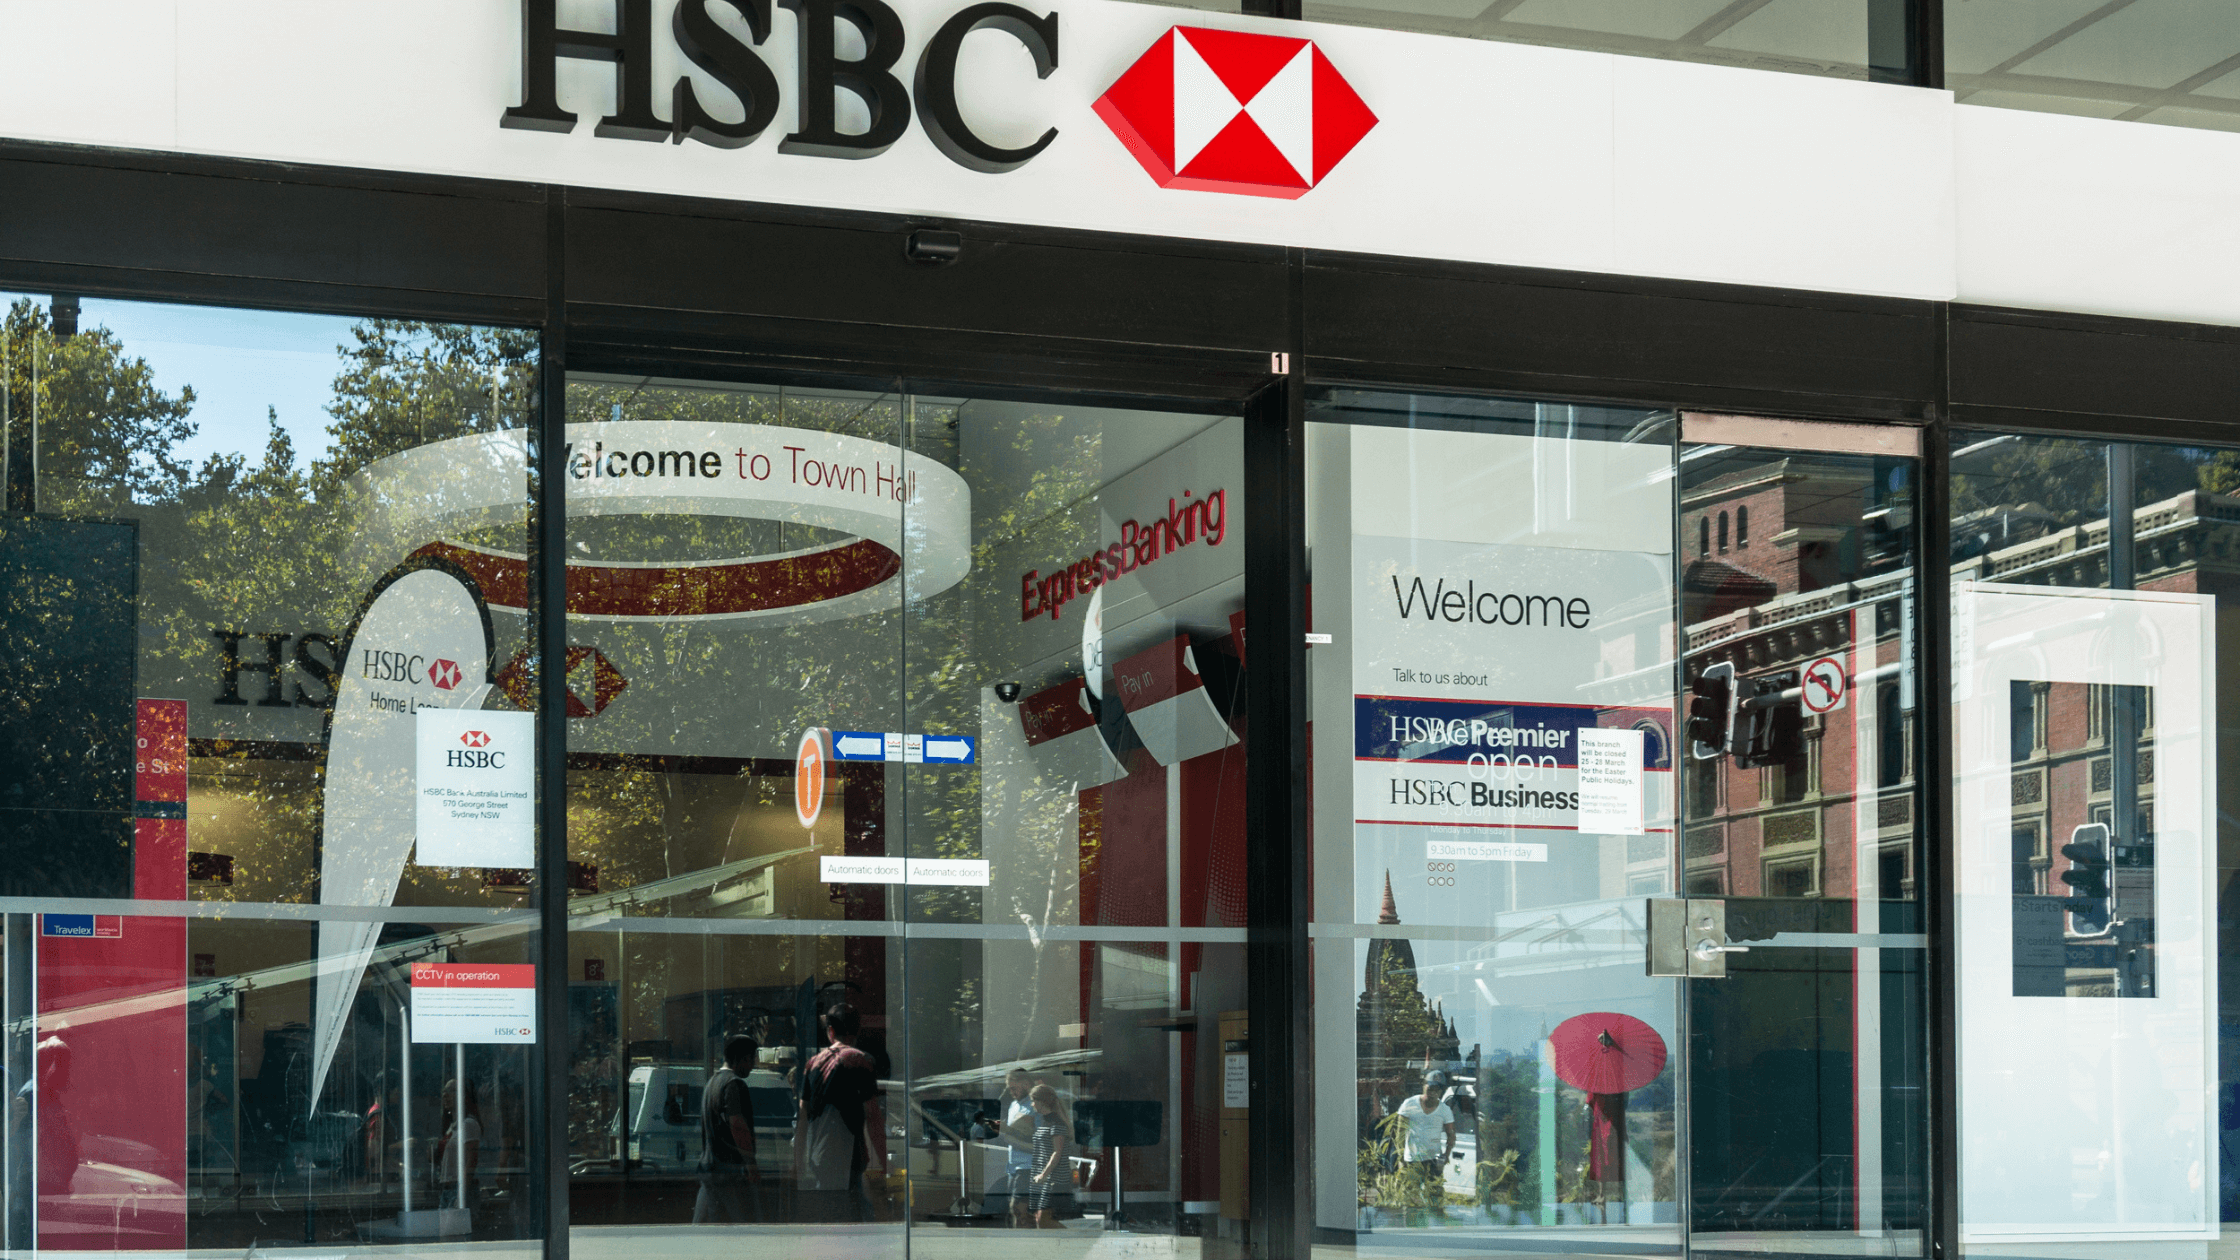 Uncover - HSBC shares